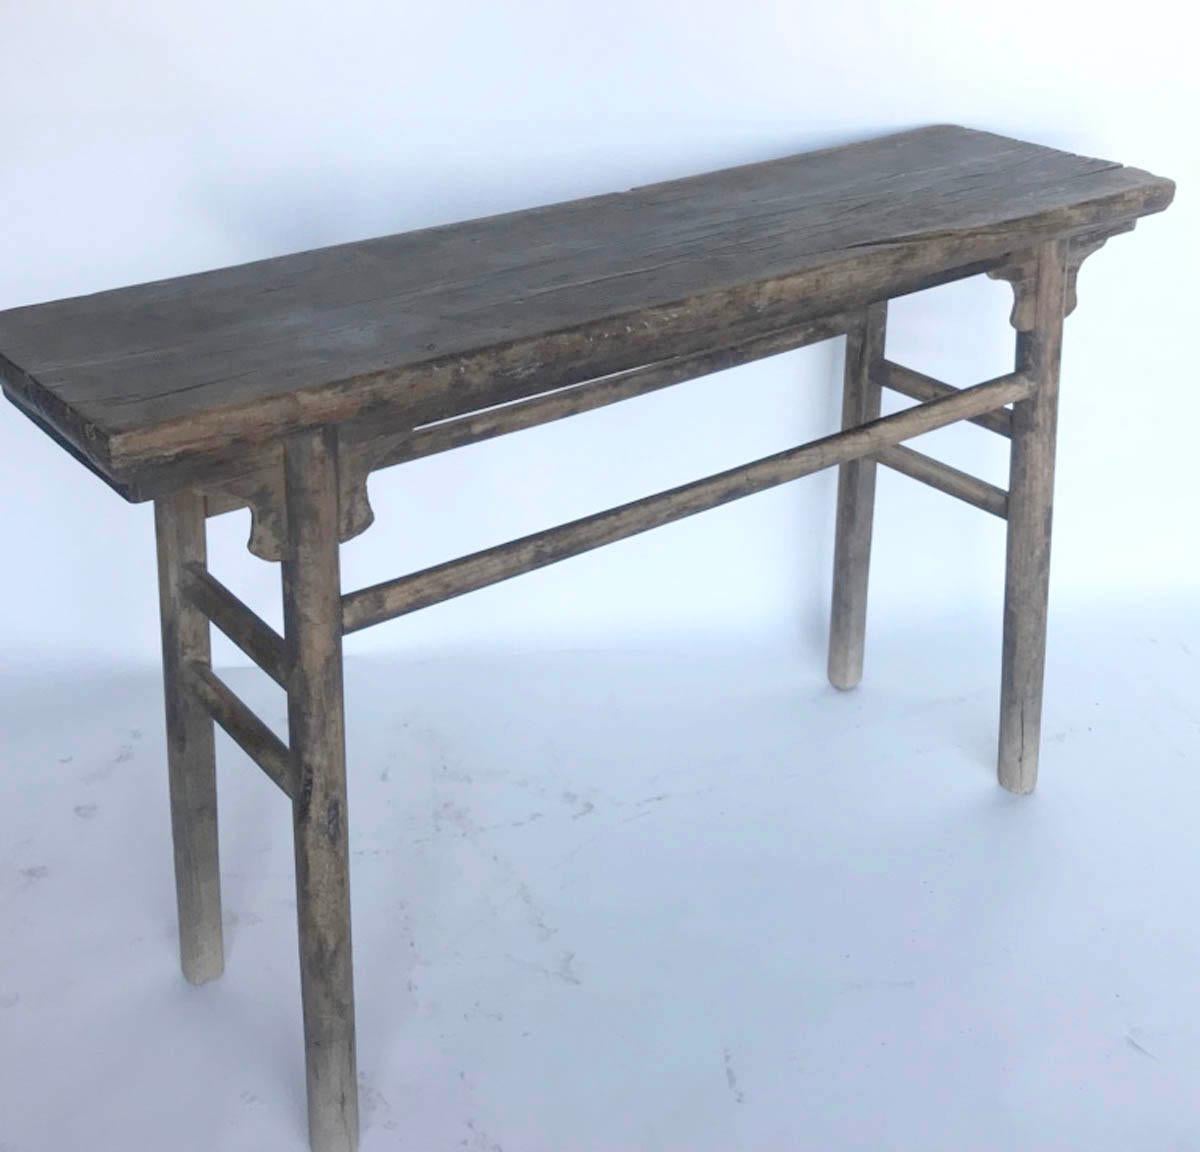 Antique Chinese Elm altar table with round legs and stretchers. Old butterfly joinery underneath top. Mortise and tenon construction. Corbel details. One wide board top. Age appropriate smooth, worn patina with traces of old finish. Overall original